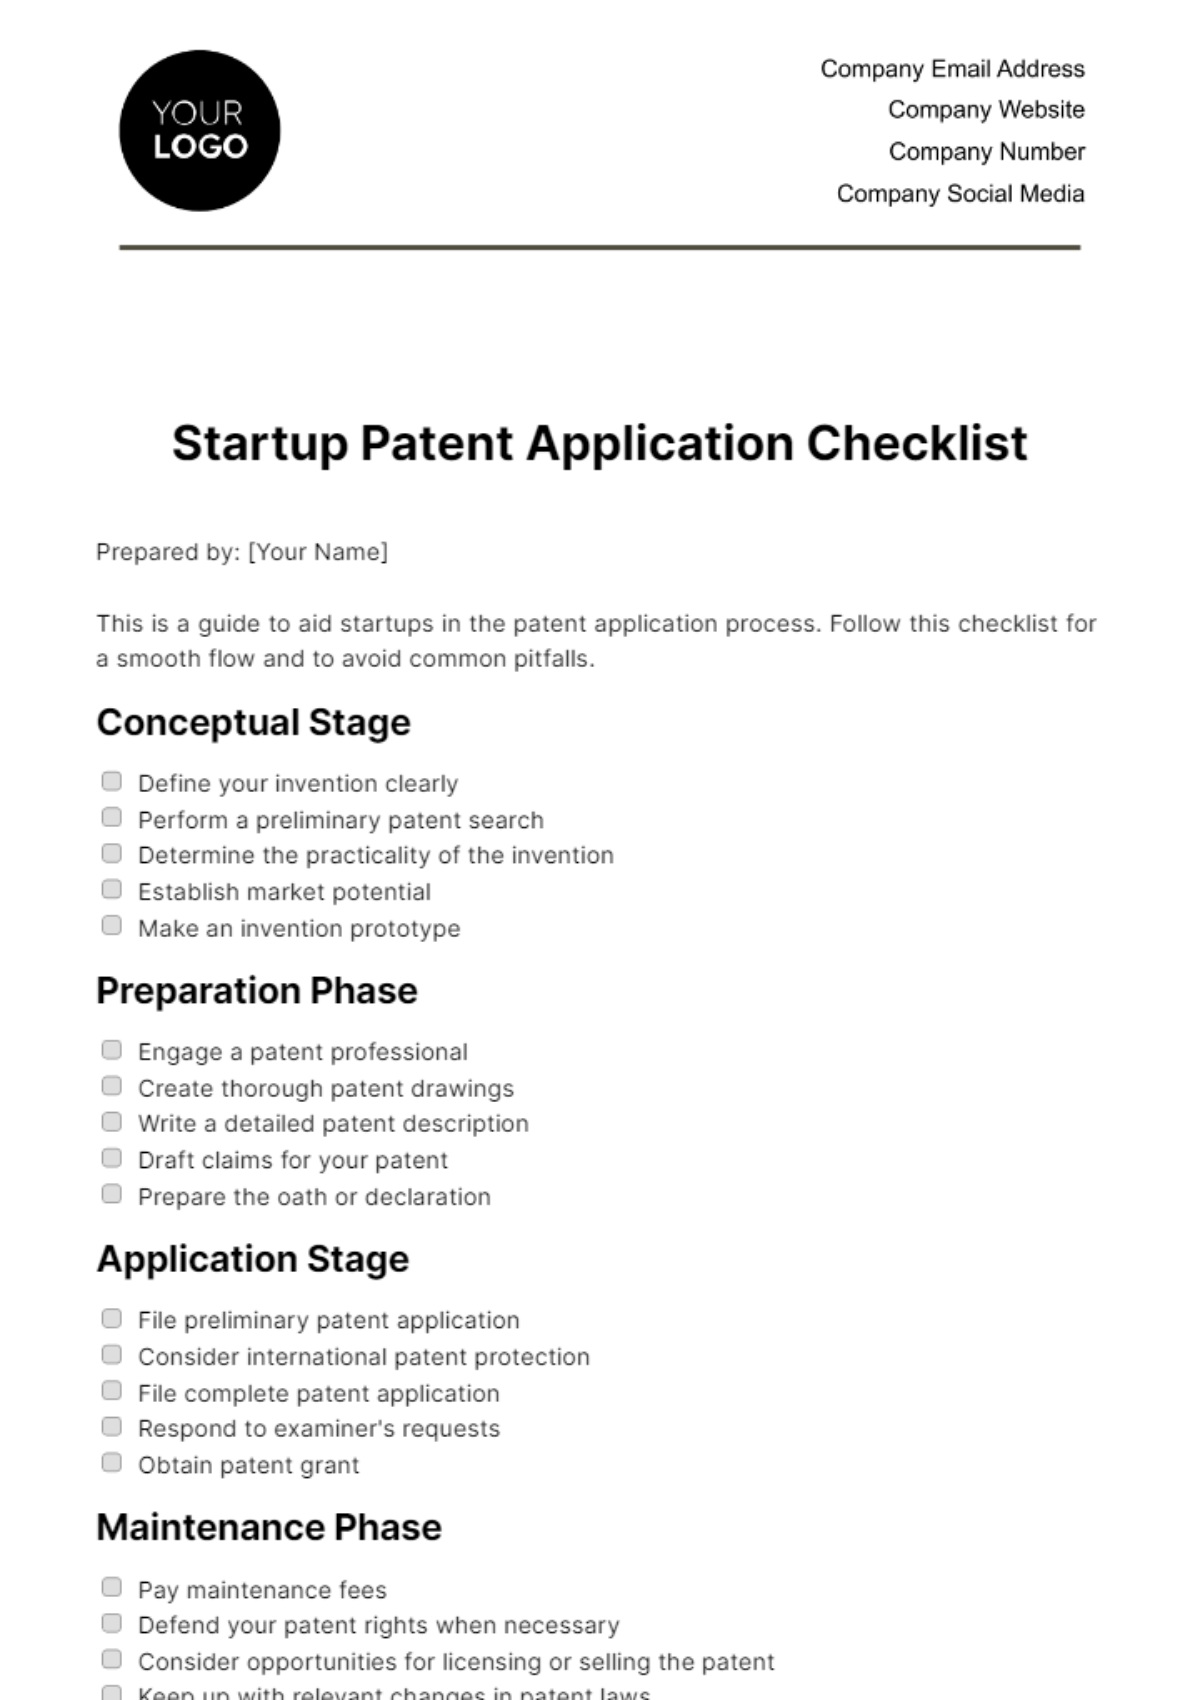 Free Startup Patent Application Checklist Template